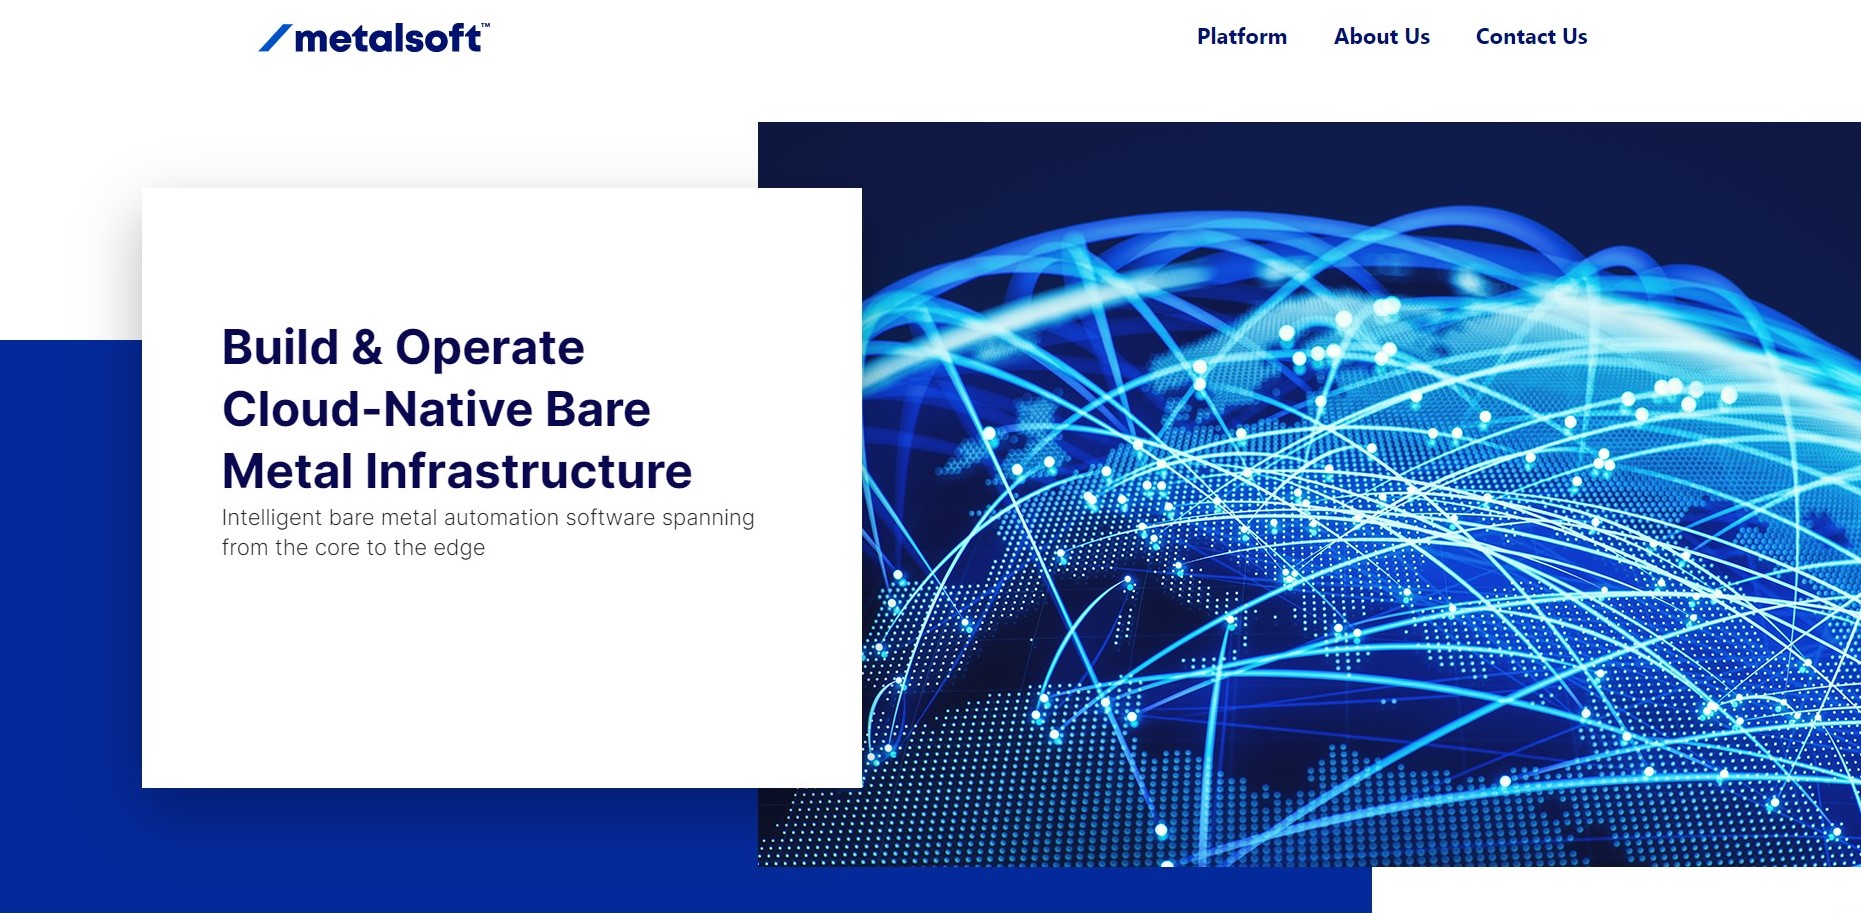 MetalSoft launches a proven bare metal management software platform for enabling cloud native infrastructure.